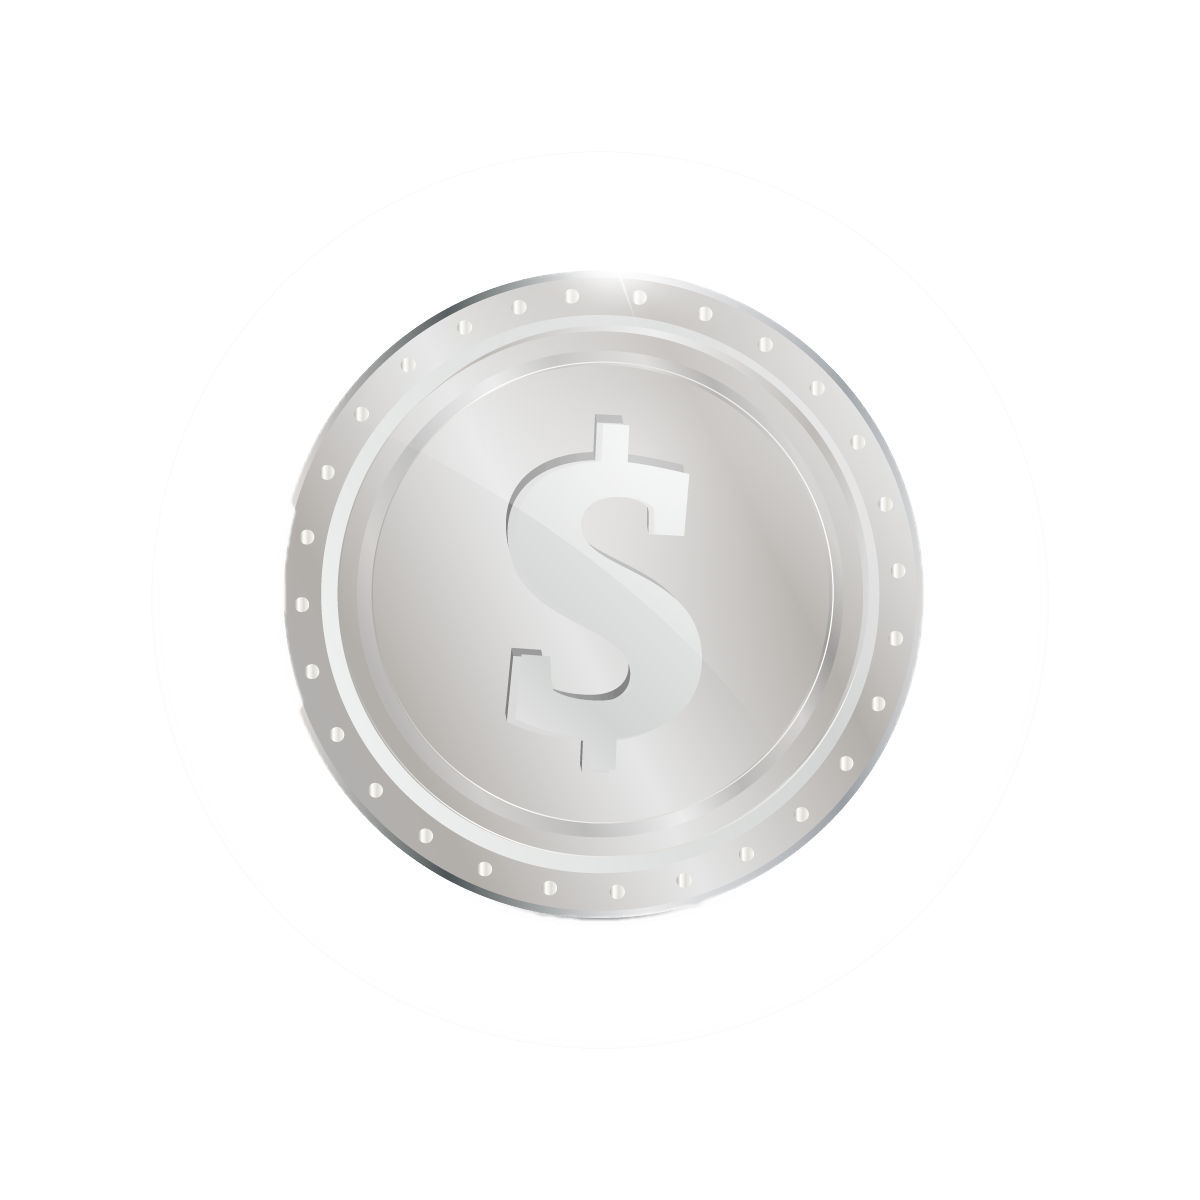 Silver Coin Download Transparent PNG Image | PNG Arts